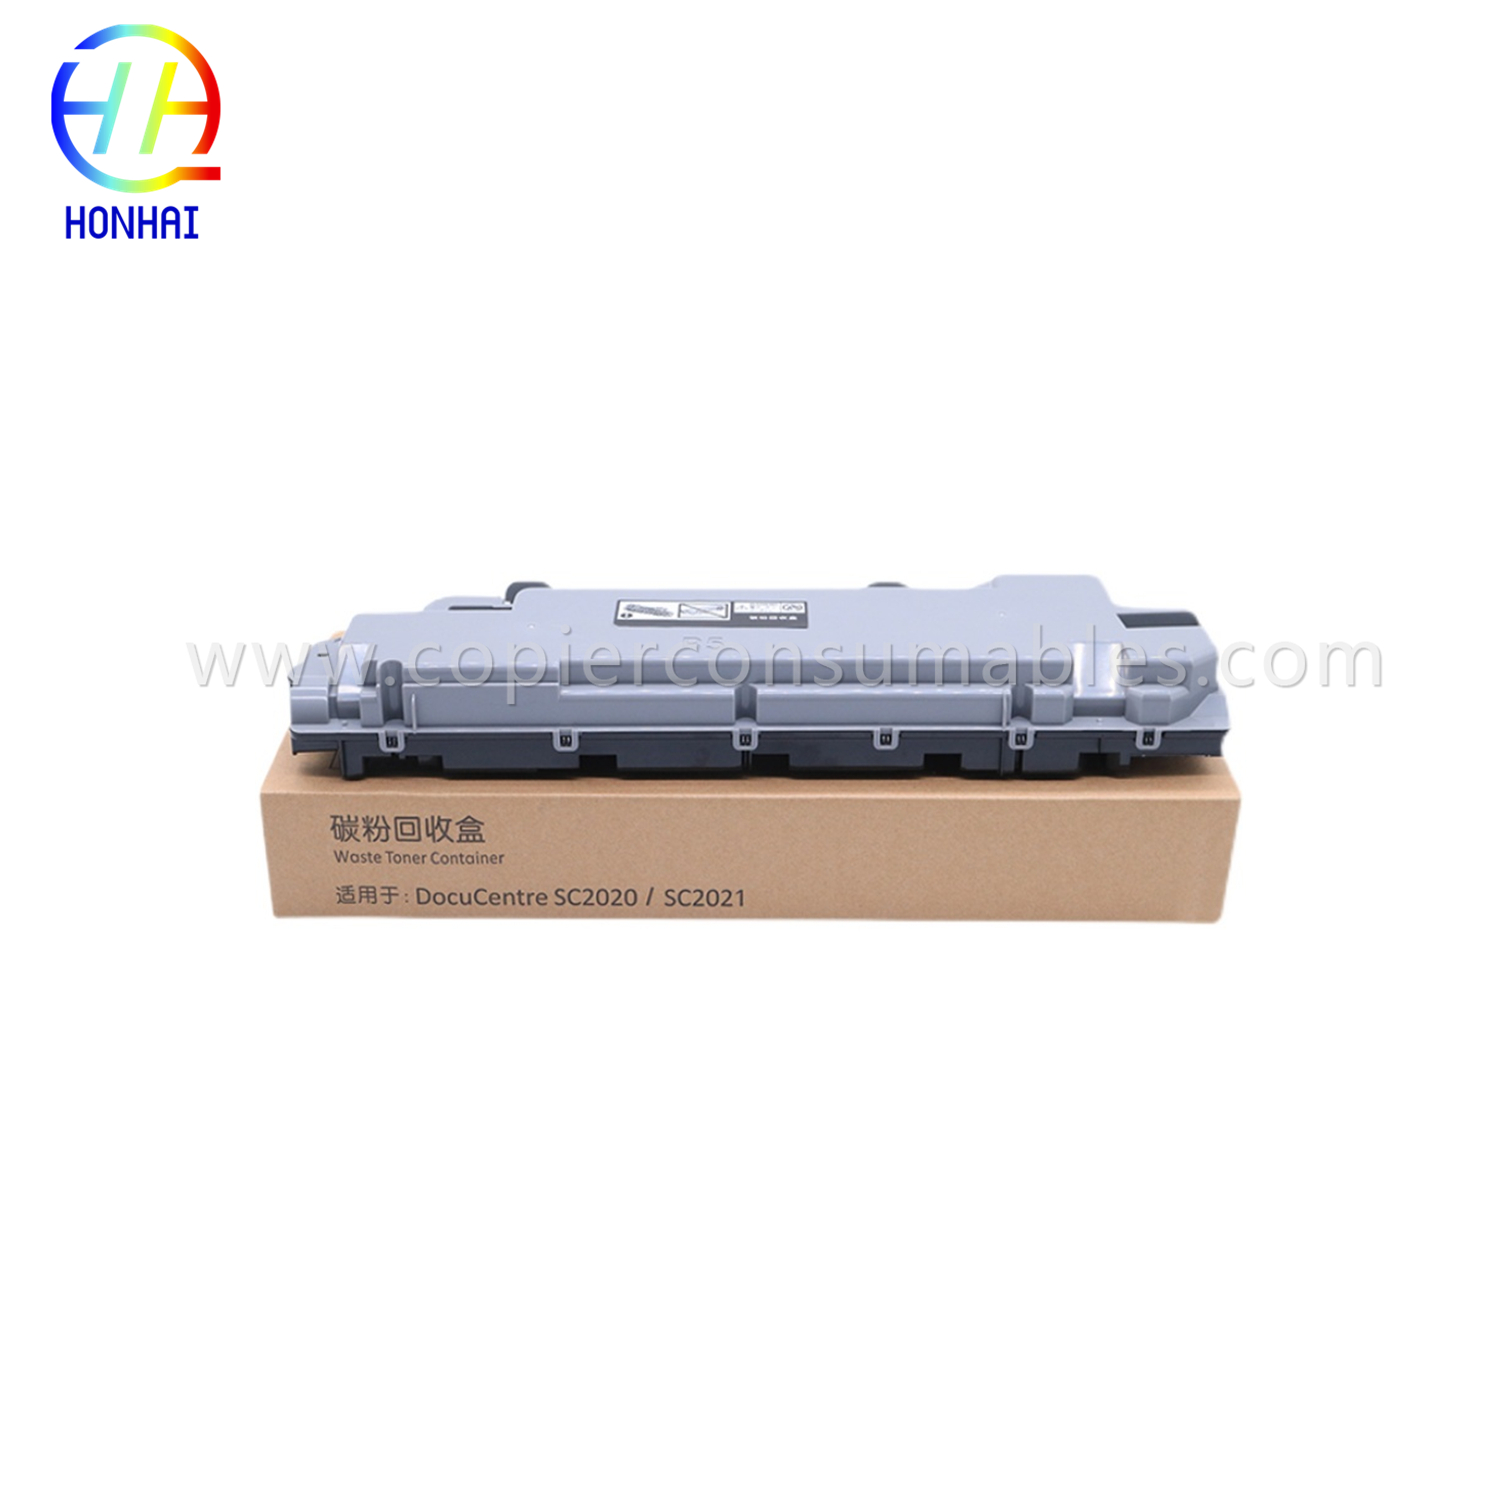 Waste Toner Container for Xerox Sc2020 Sc2021 2020 2021 (CWAA0869) OEM